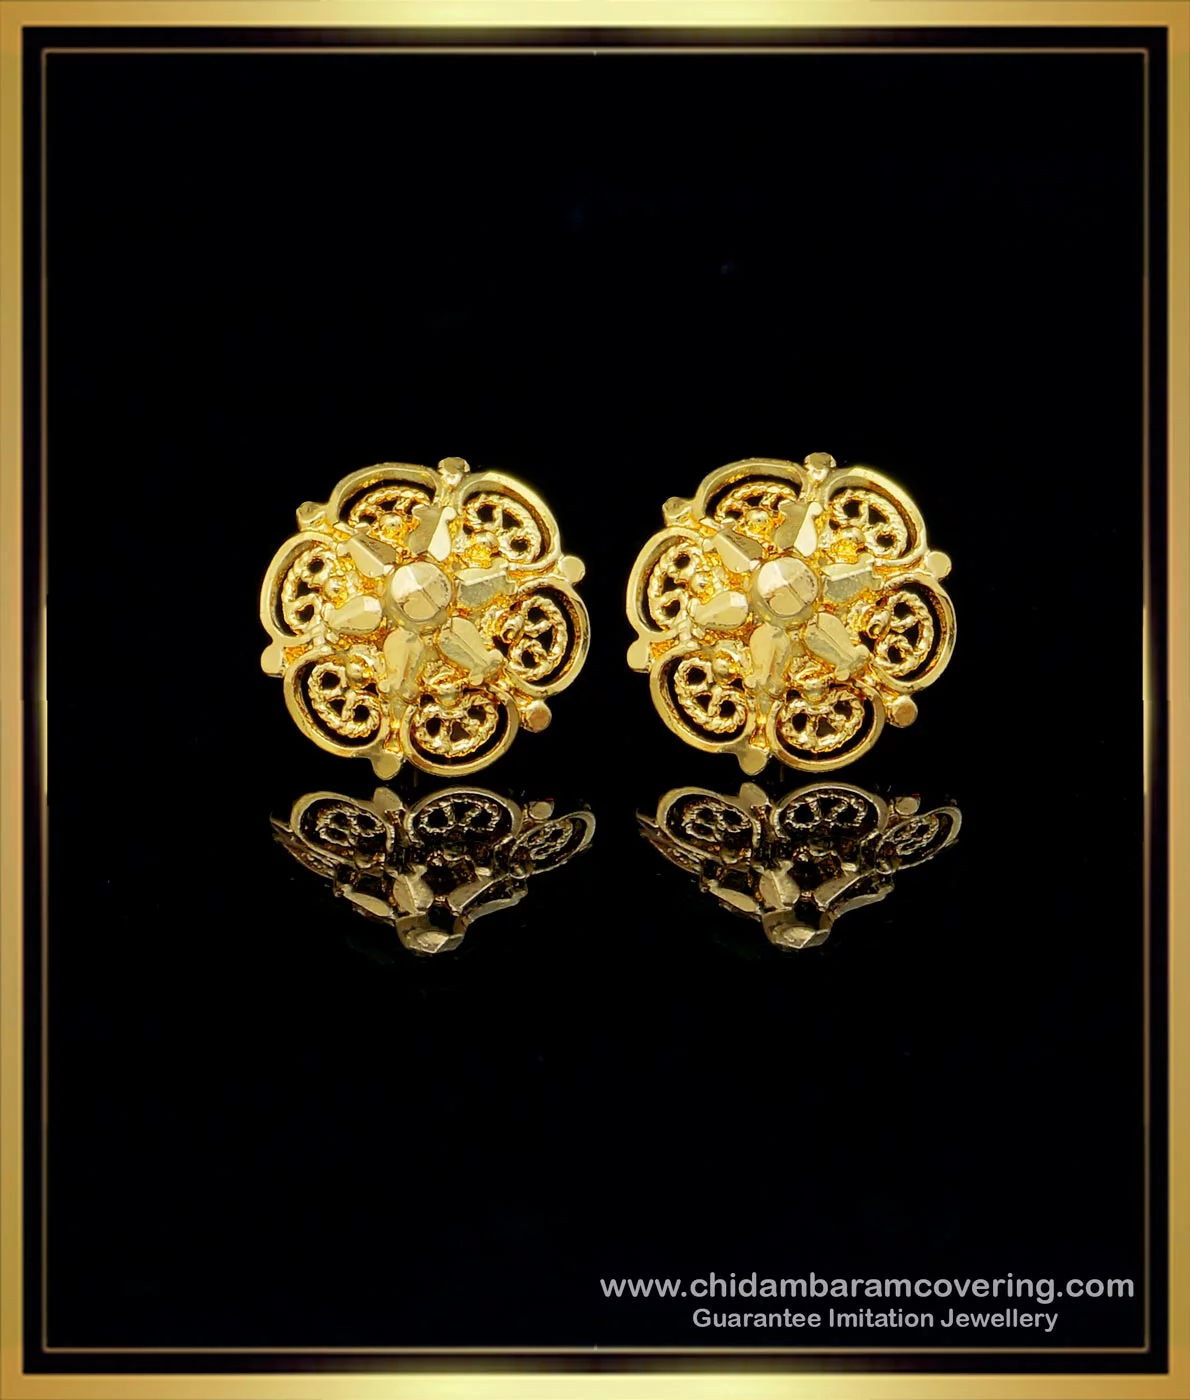 Round Shaped Gold Earrings Design To Wear Daily - PC Chandra Jewellers